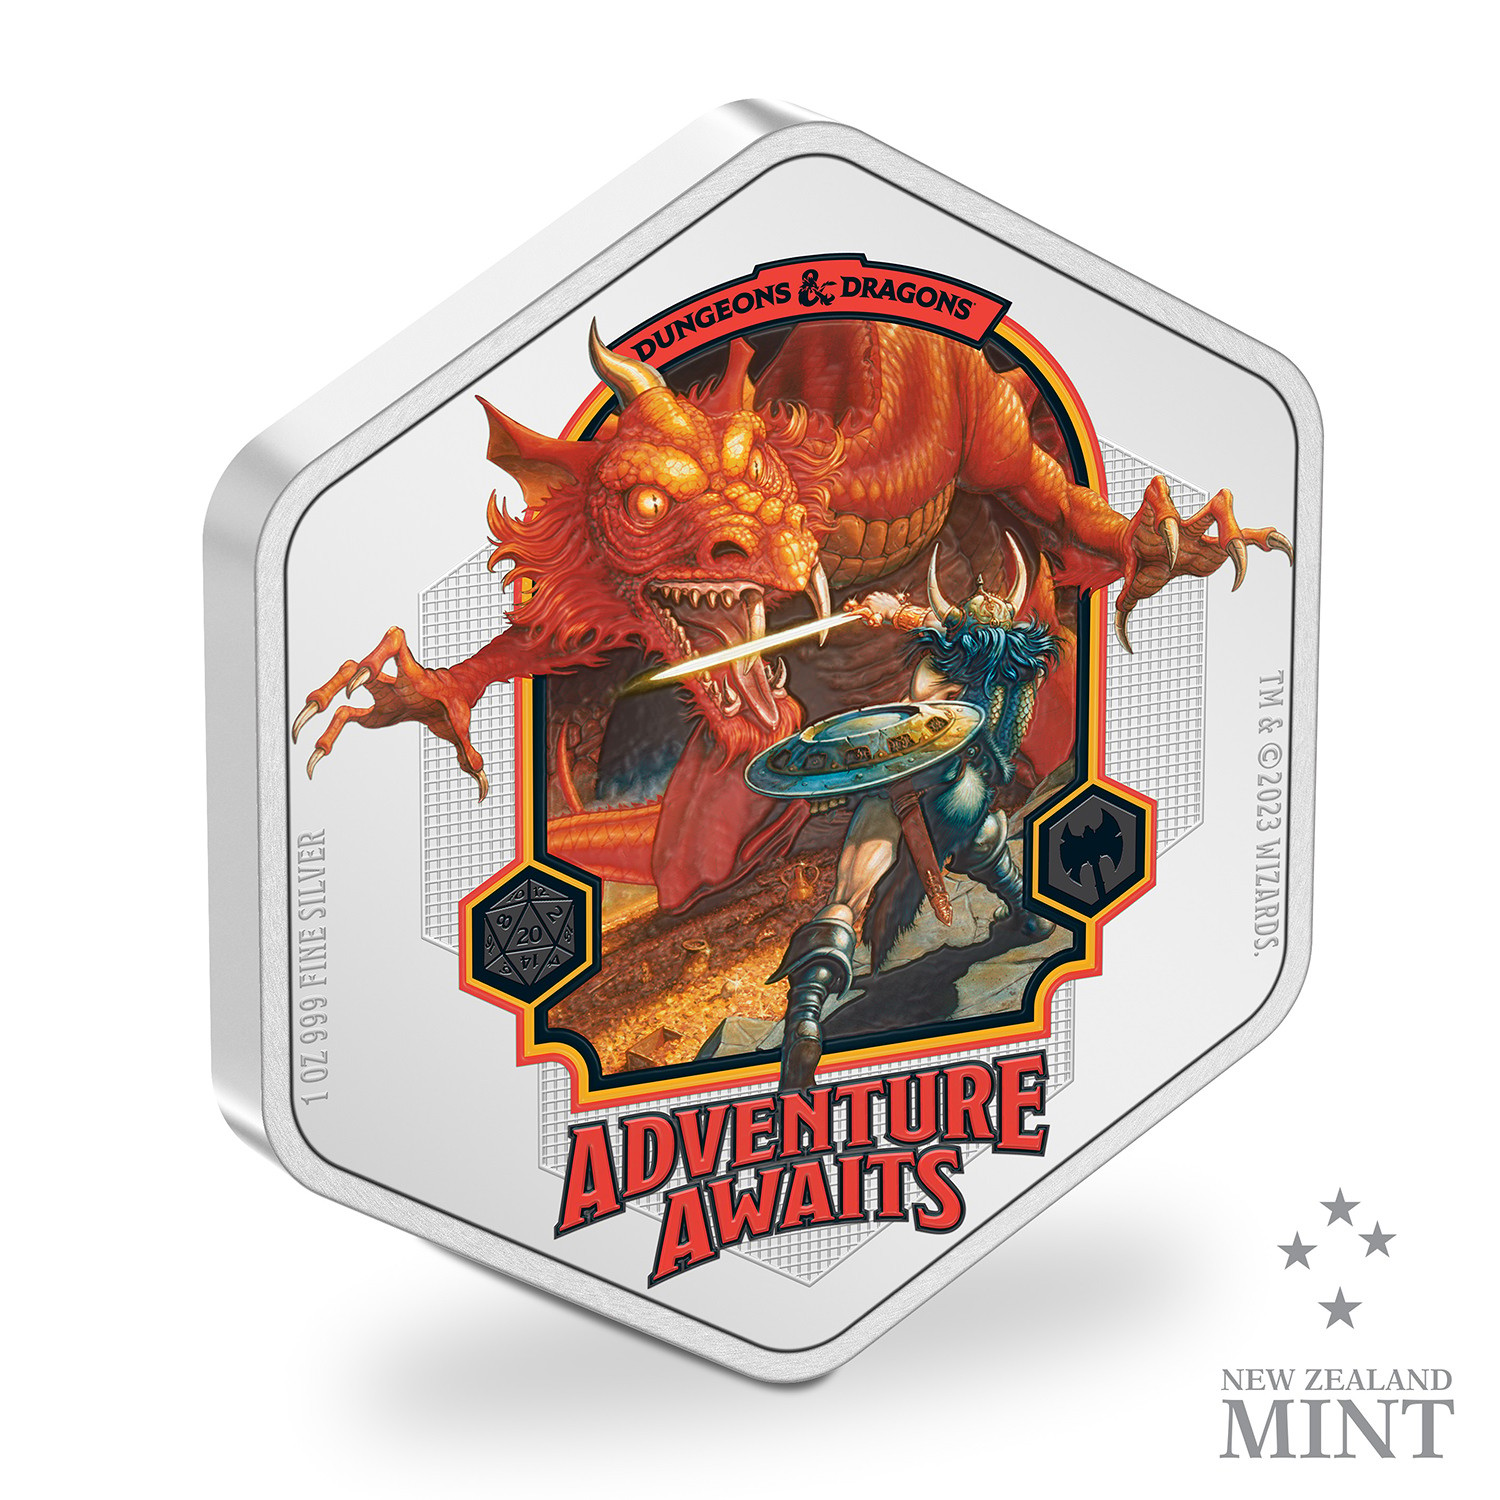 Dungeons & Dragons 1oz Silver Coin- Prototype Shown